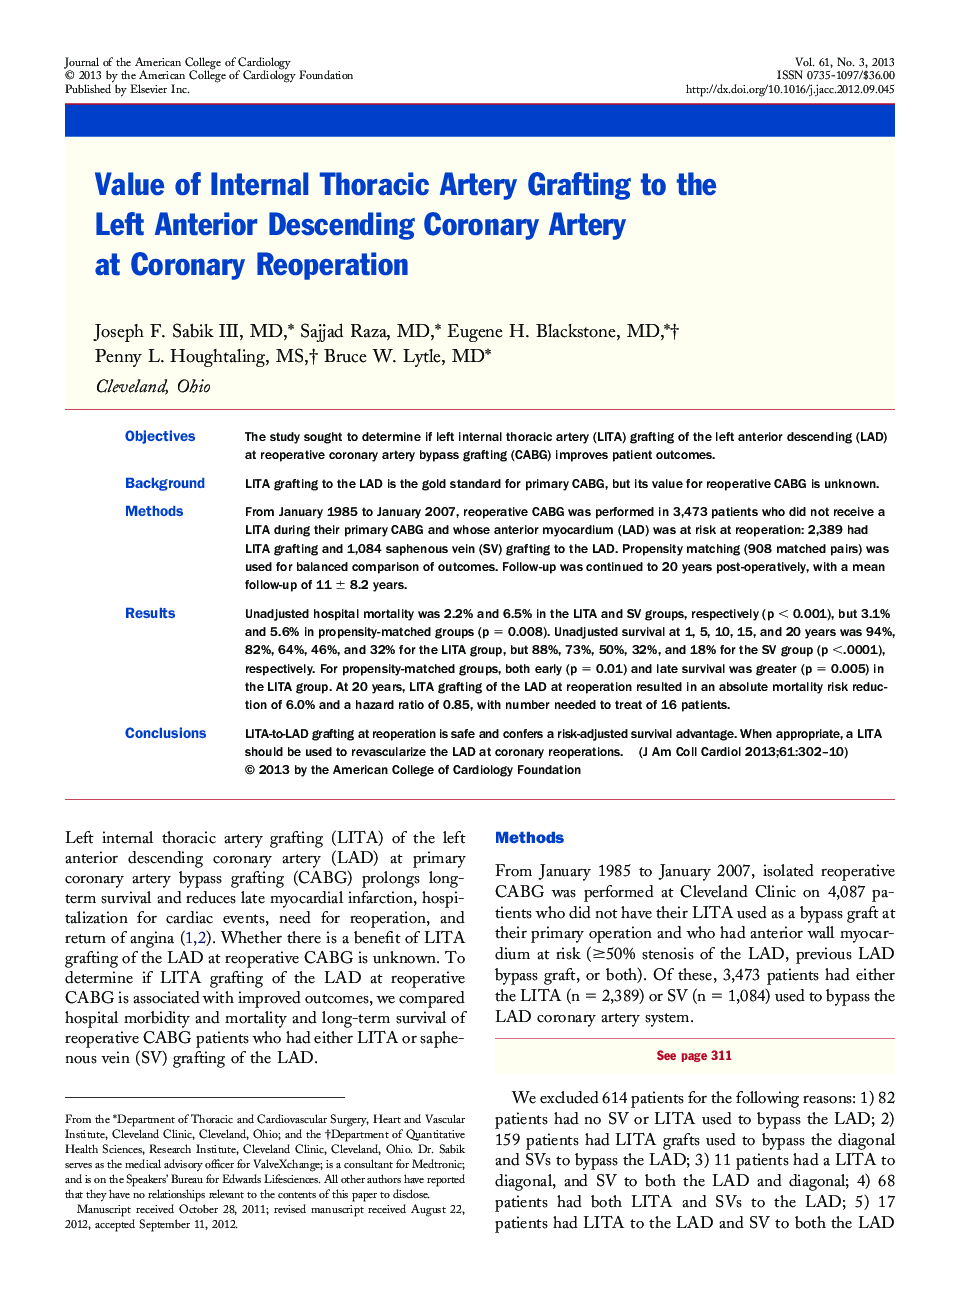 Value of Internal Thoracic Artery Grafting to the Left Anterior Descending Coronary Artery at Coronary Reoperation 